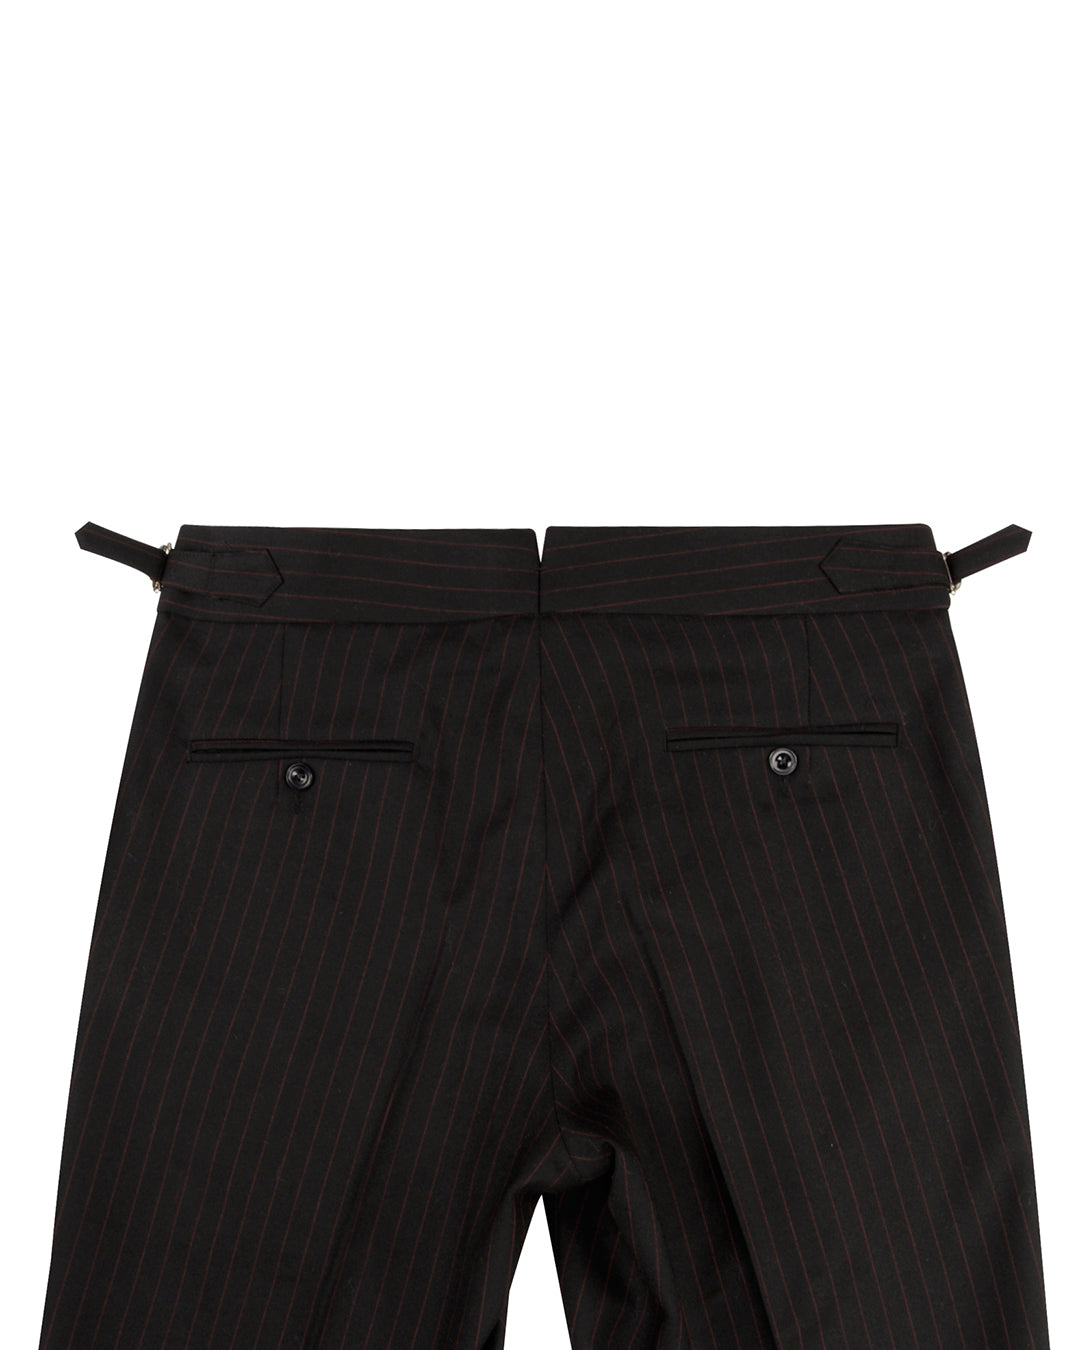 Dugdale Royal Classic: Black Twill with Brown Pinstripes